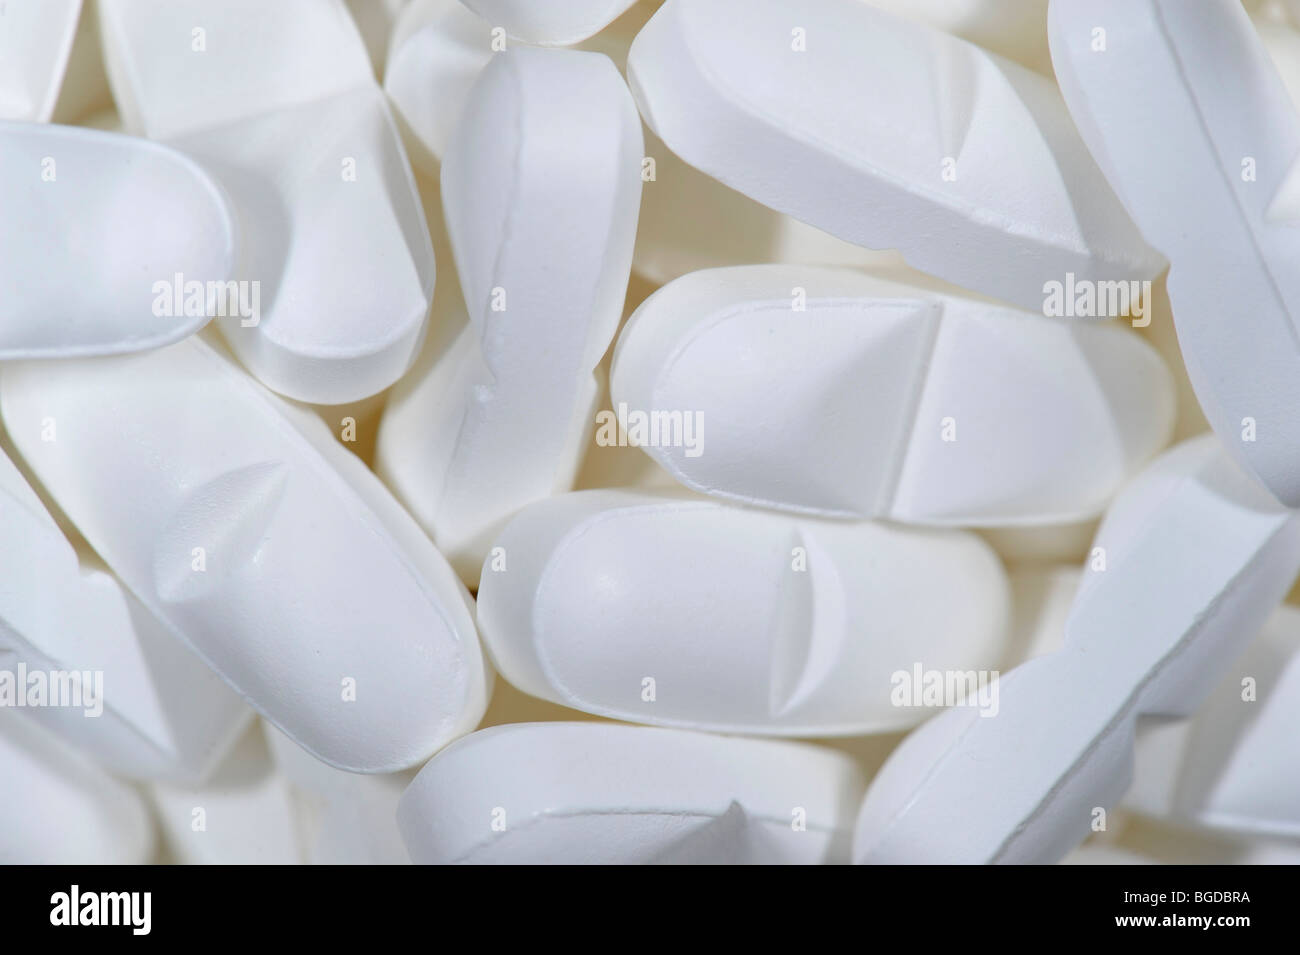 Pills and tablets Stock Photo